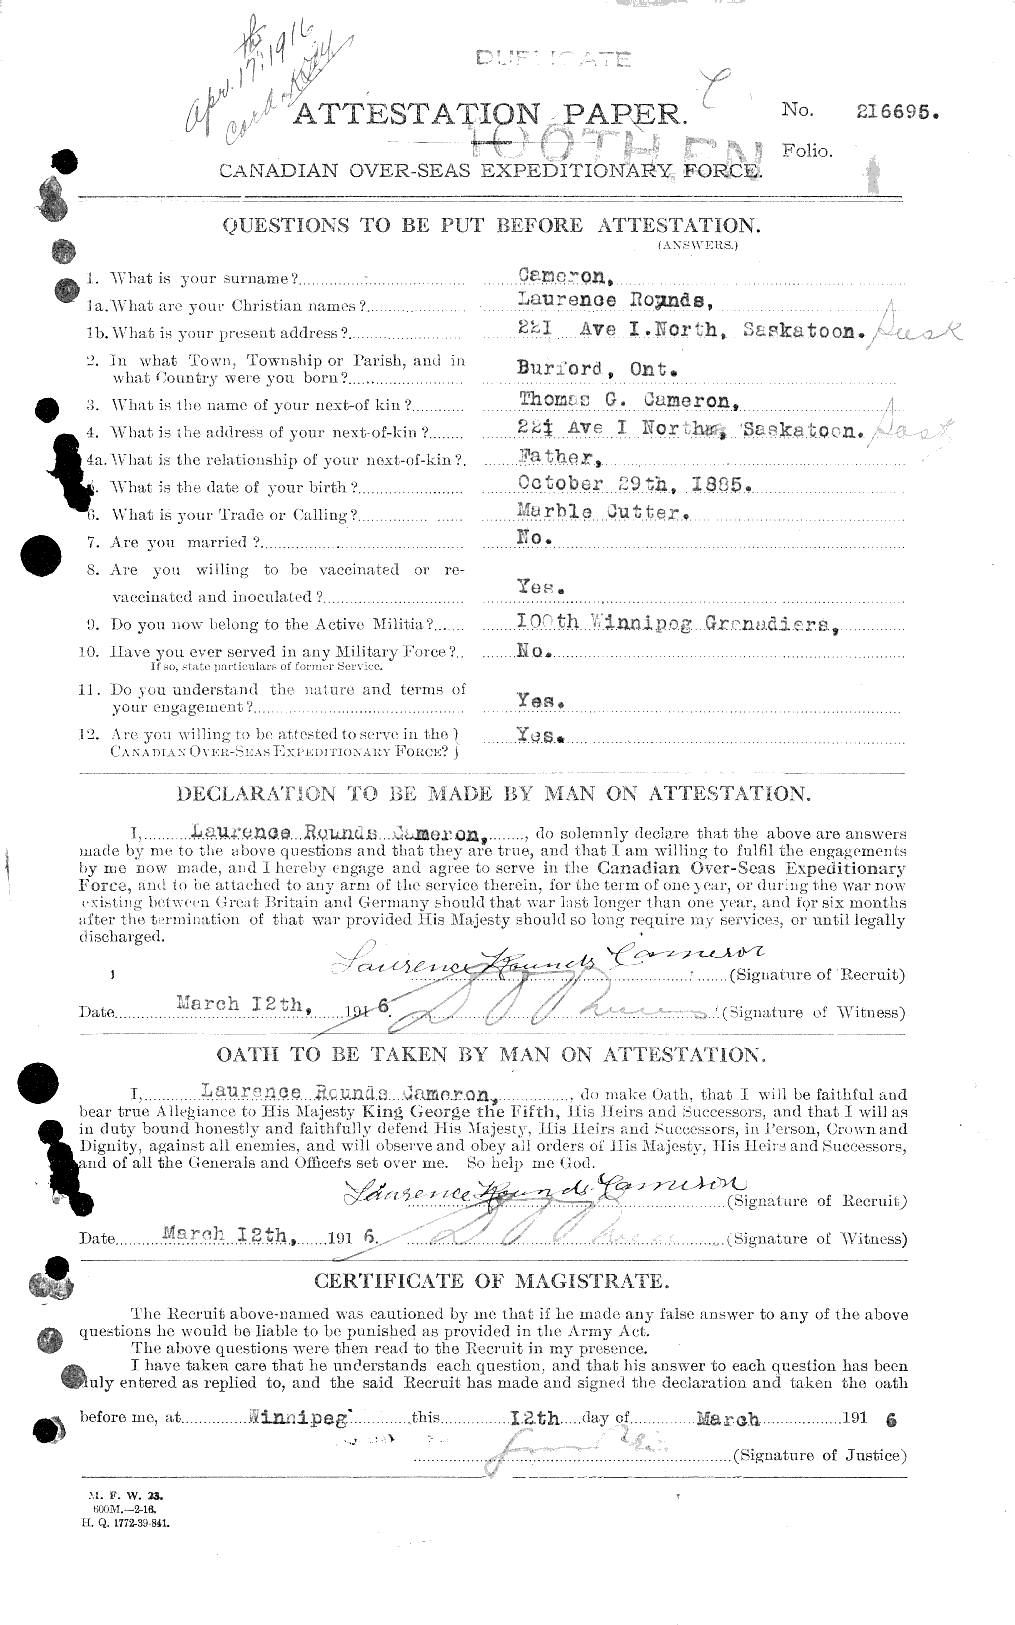 Personnel Records of the First World War - CEF 002382a